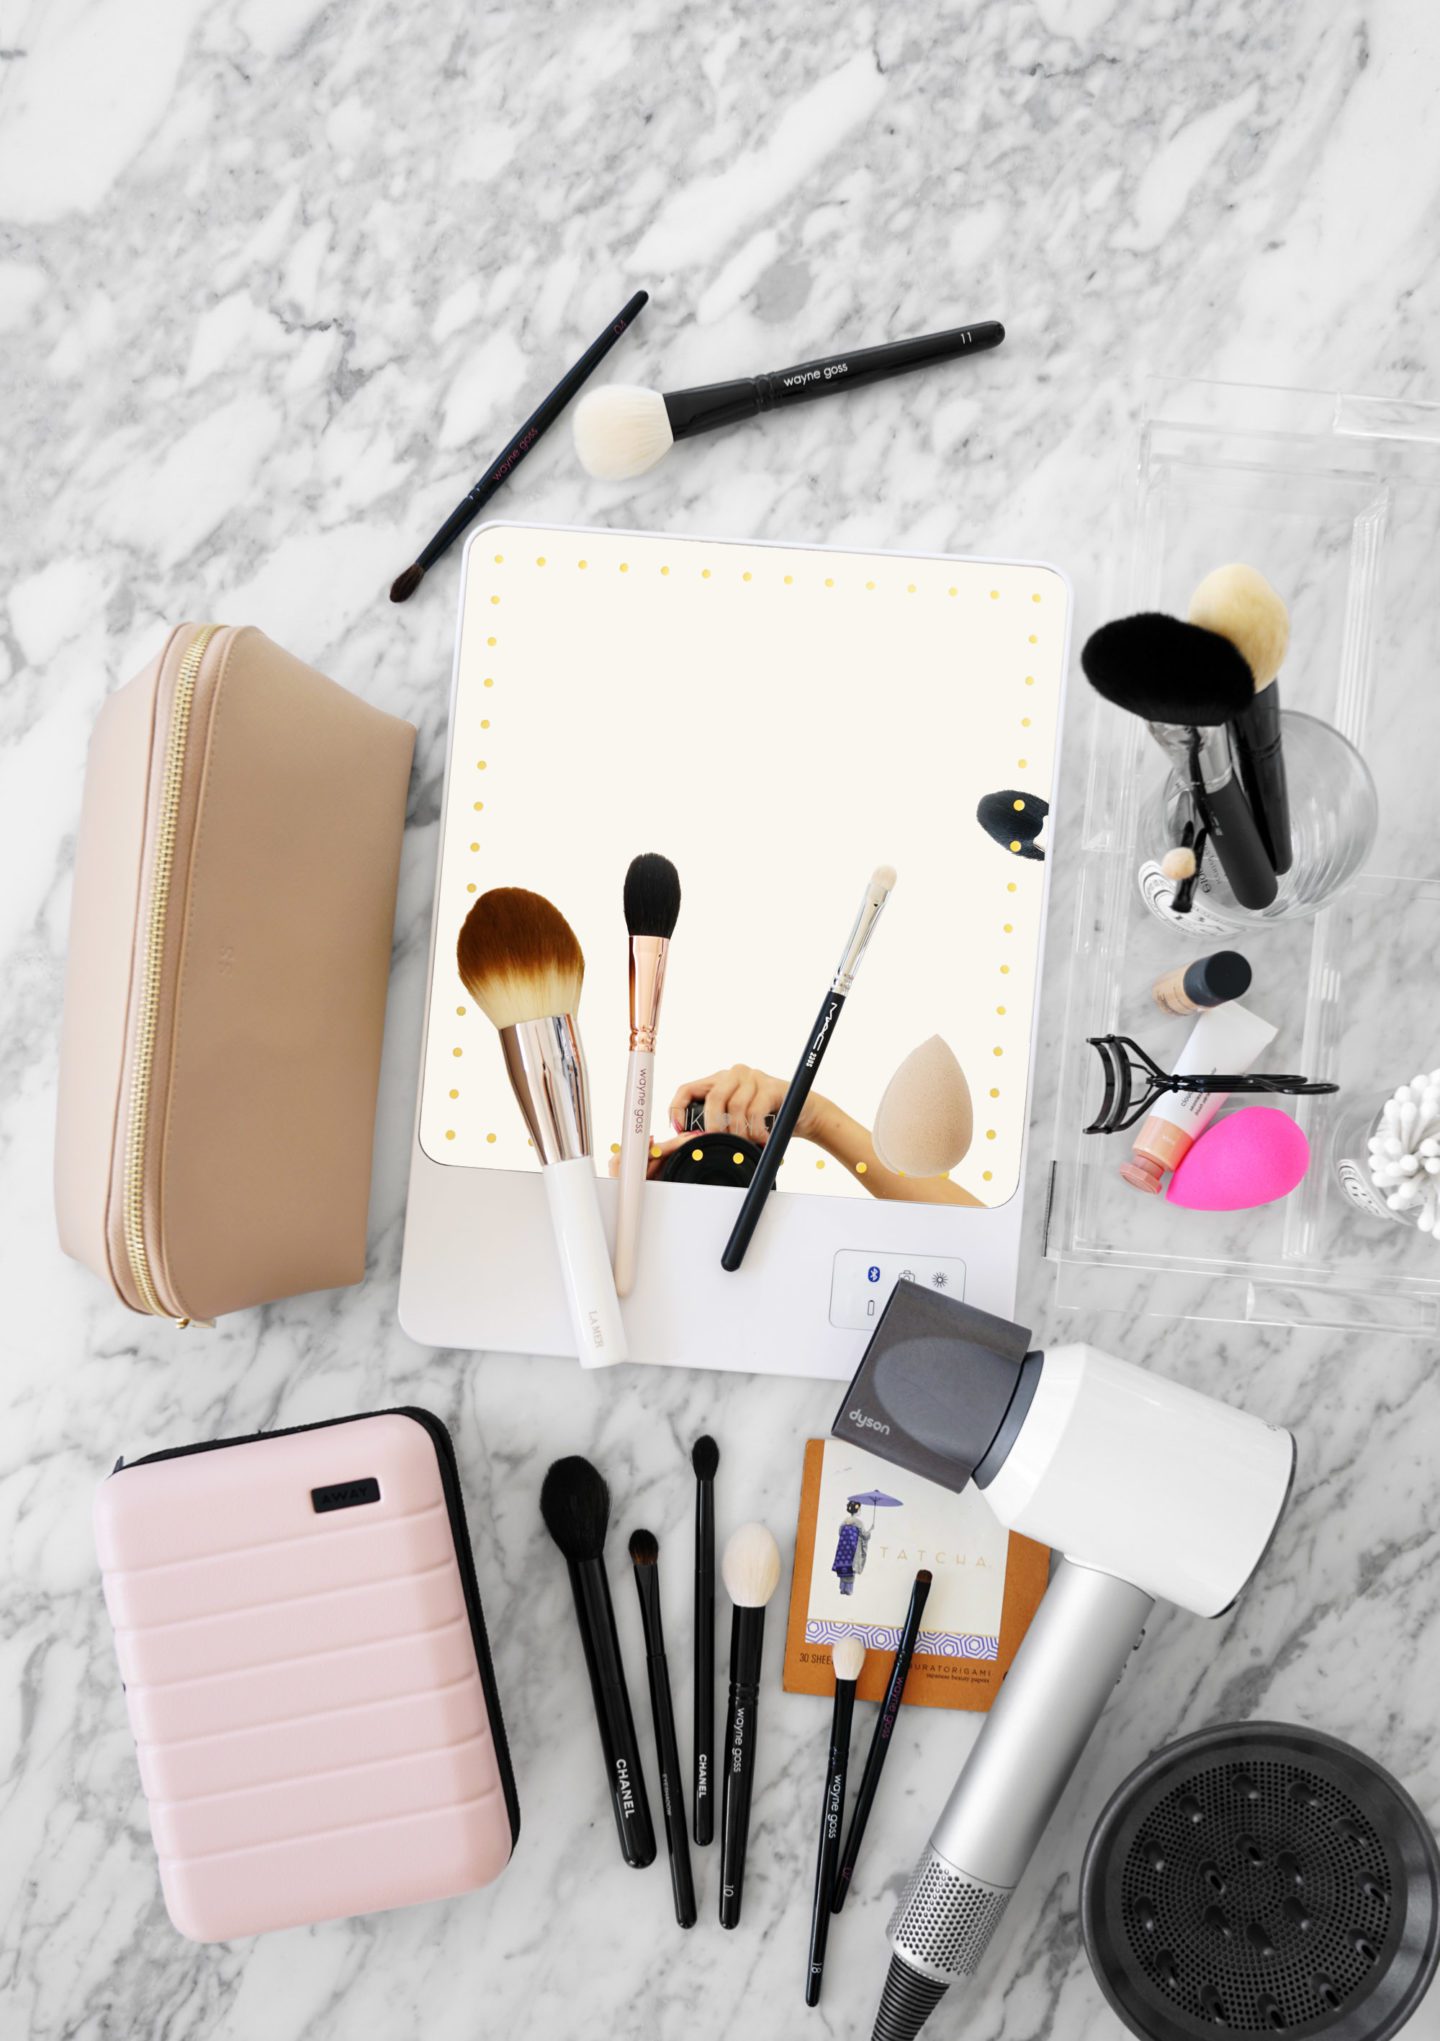 Best Beauty Tools and Accessories | Beauty Look Book